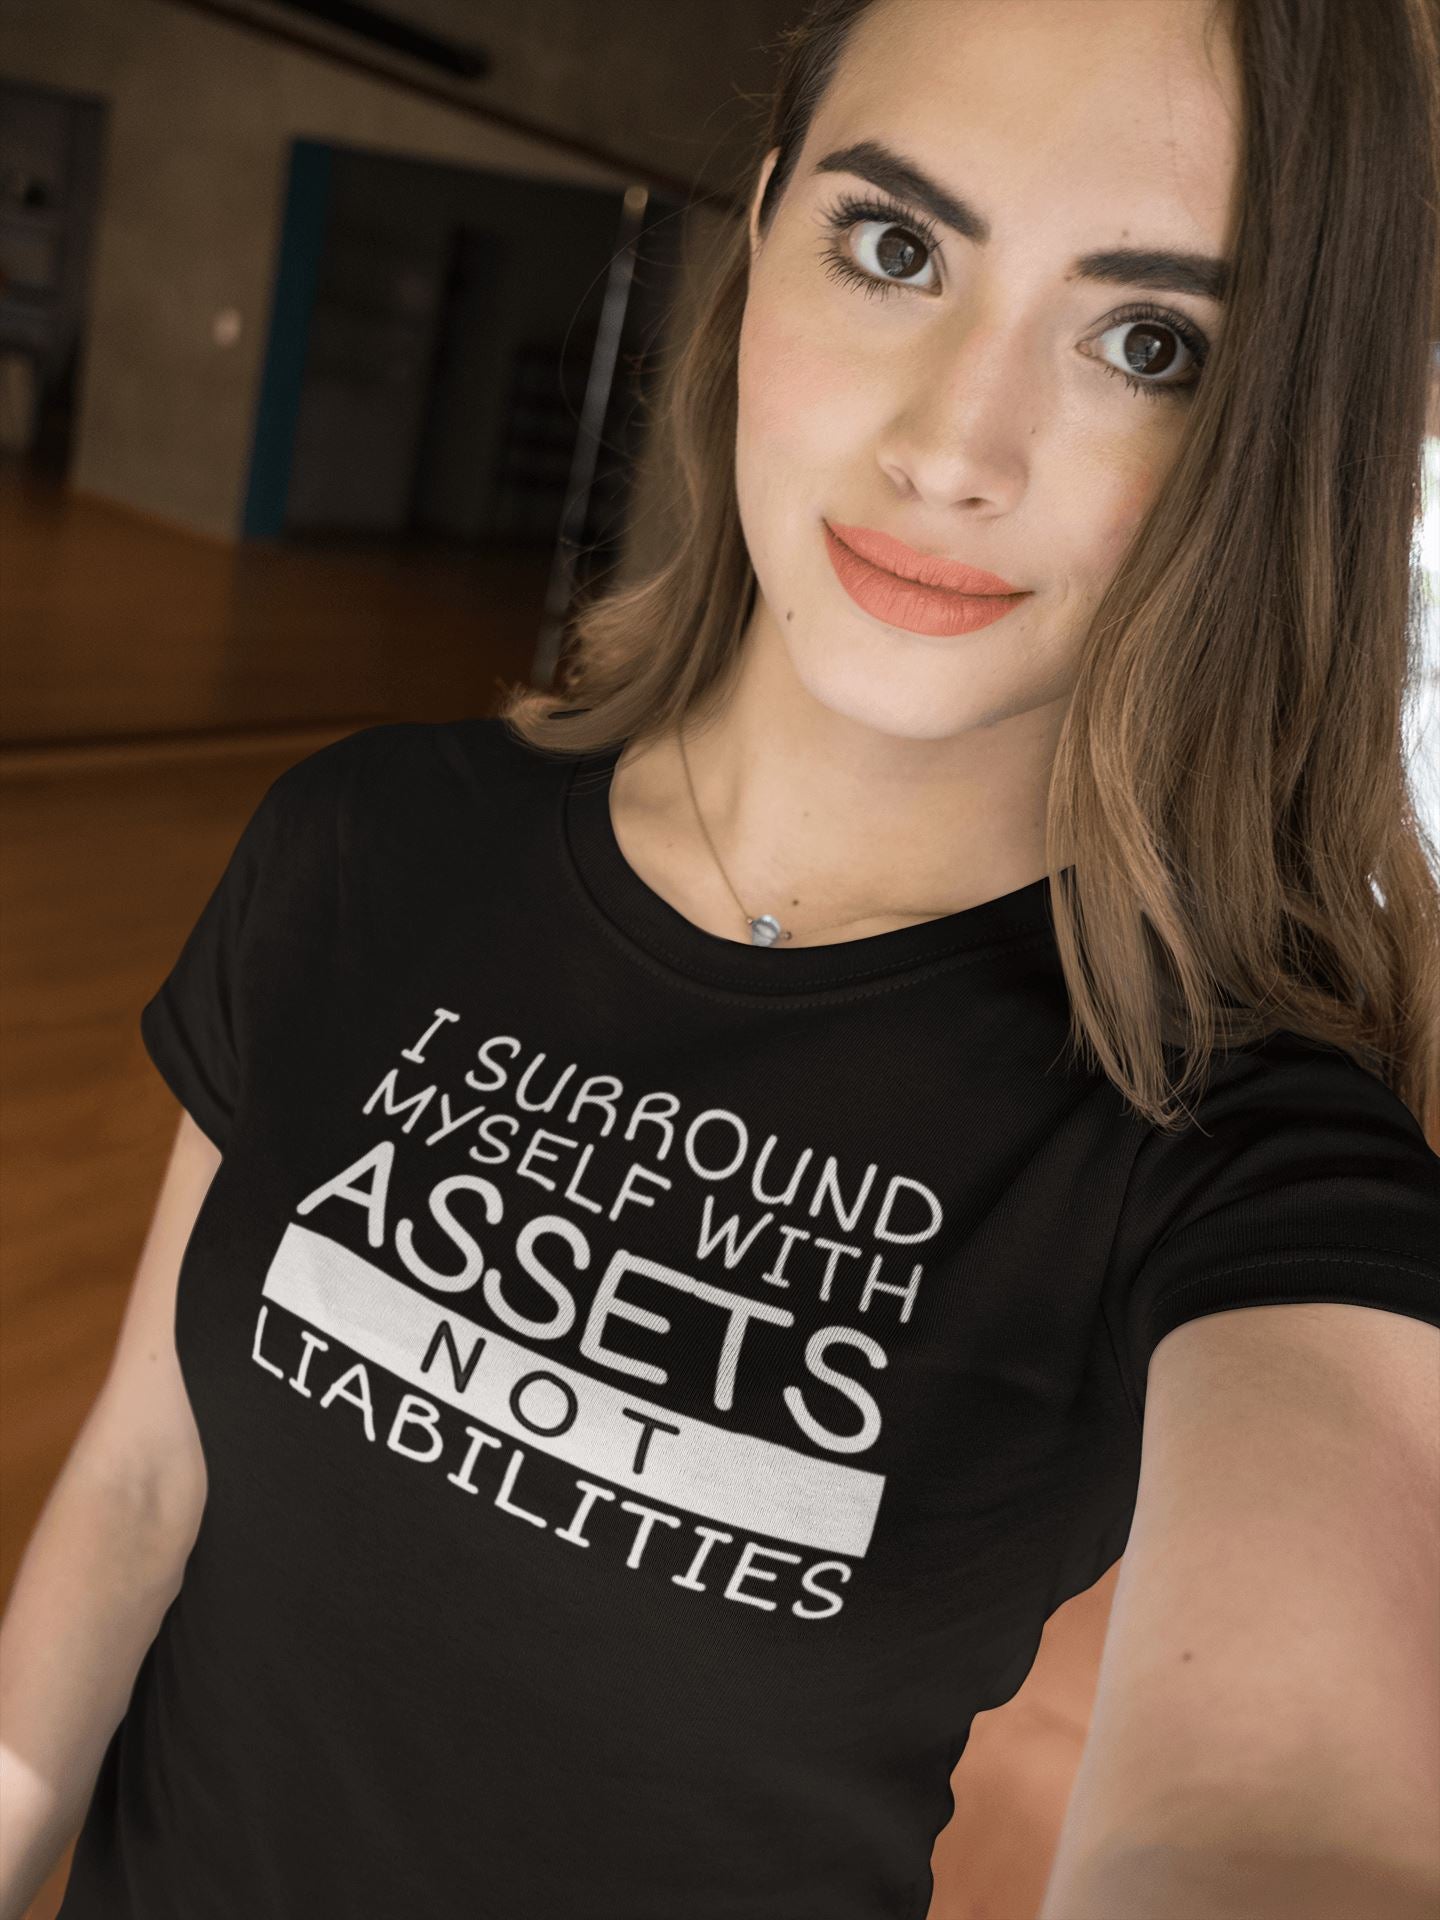 I Surround Myself with Assets Not Liabilities Special Black T Shirt for Men and Women - Catch My Drift India  black, clothing, general, made in india, shirt, stock market, t shirt, trader, tr